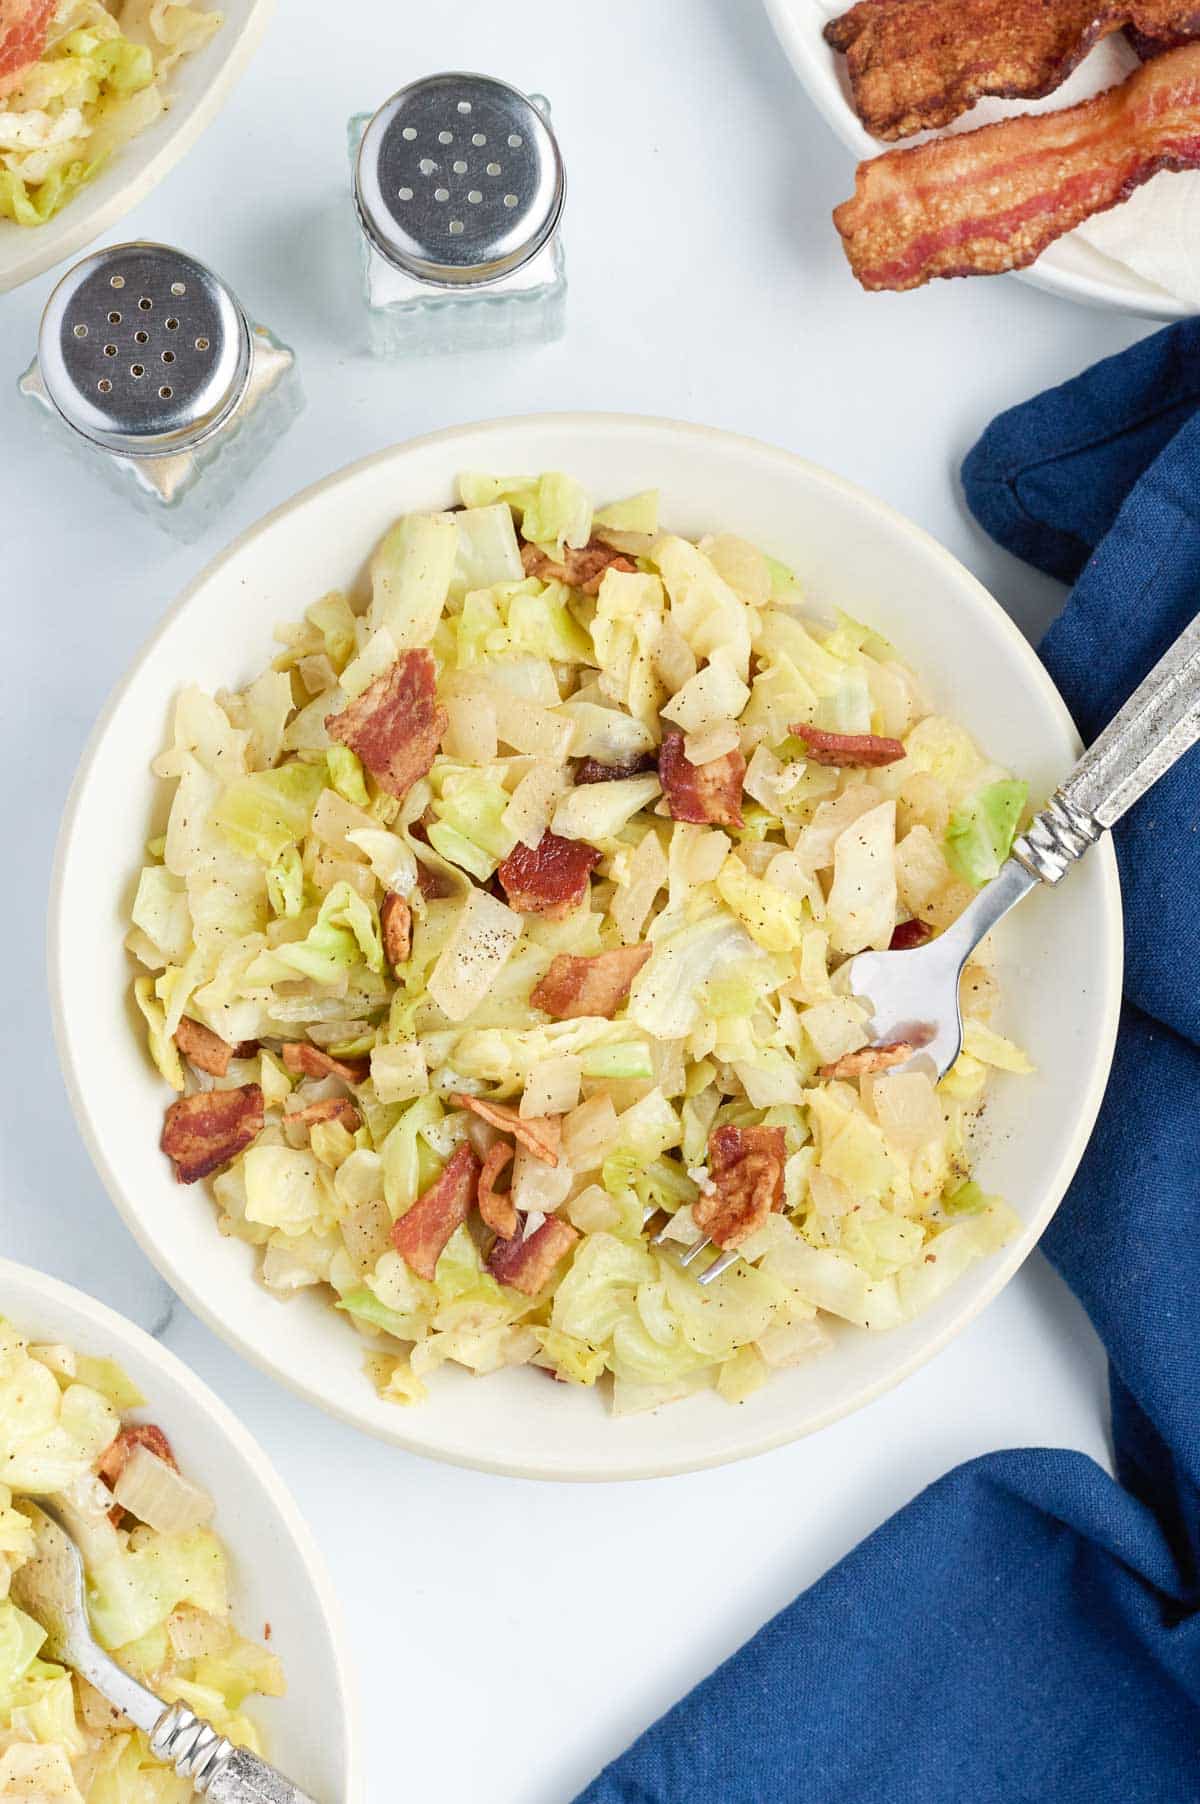 Add bacon to fried cabbage for a flavorful side dish.